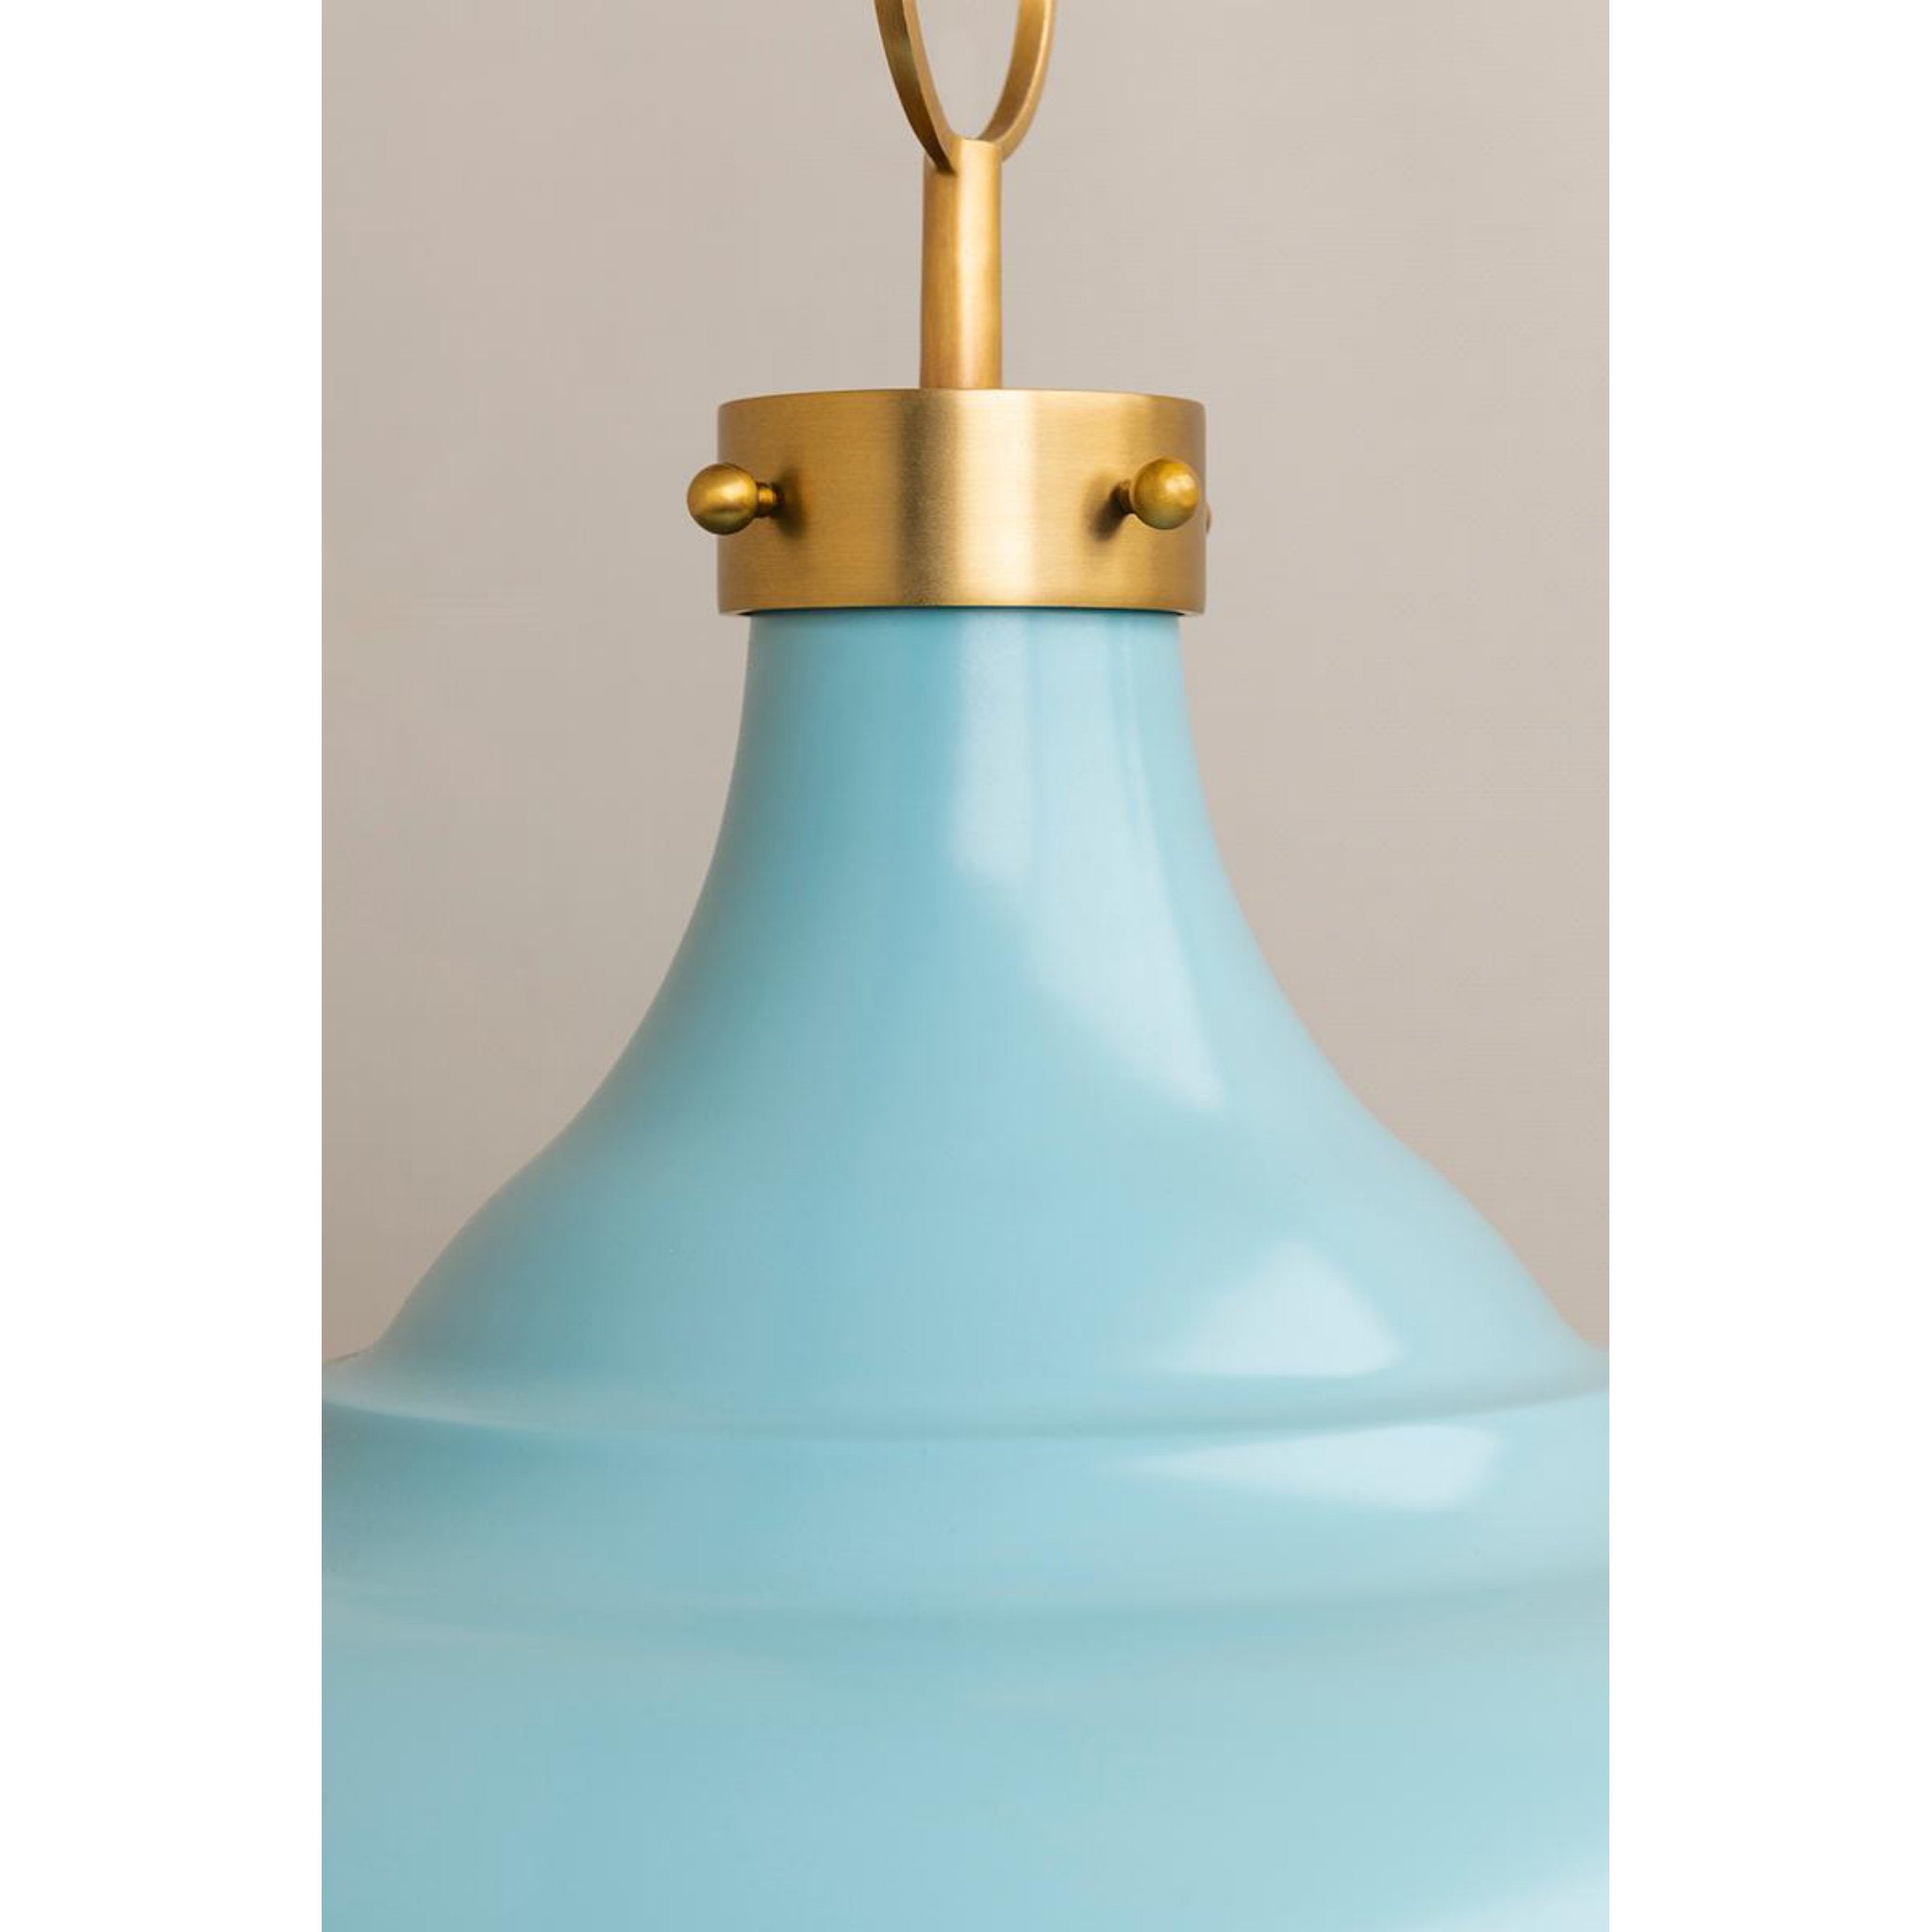 Painted No.1 3 Light Pendant in Aged Brass/darkest Blue by Mark D. Sikes